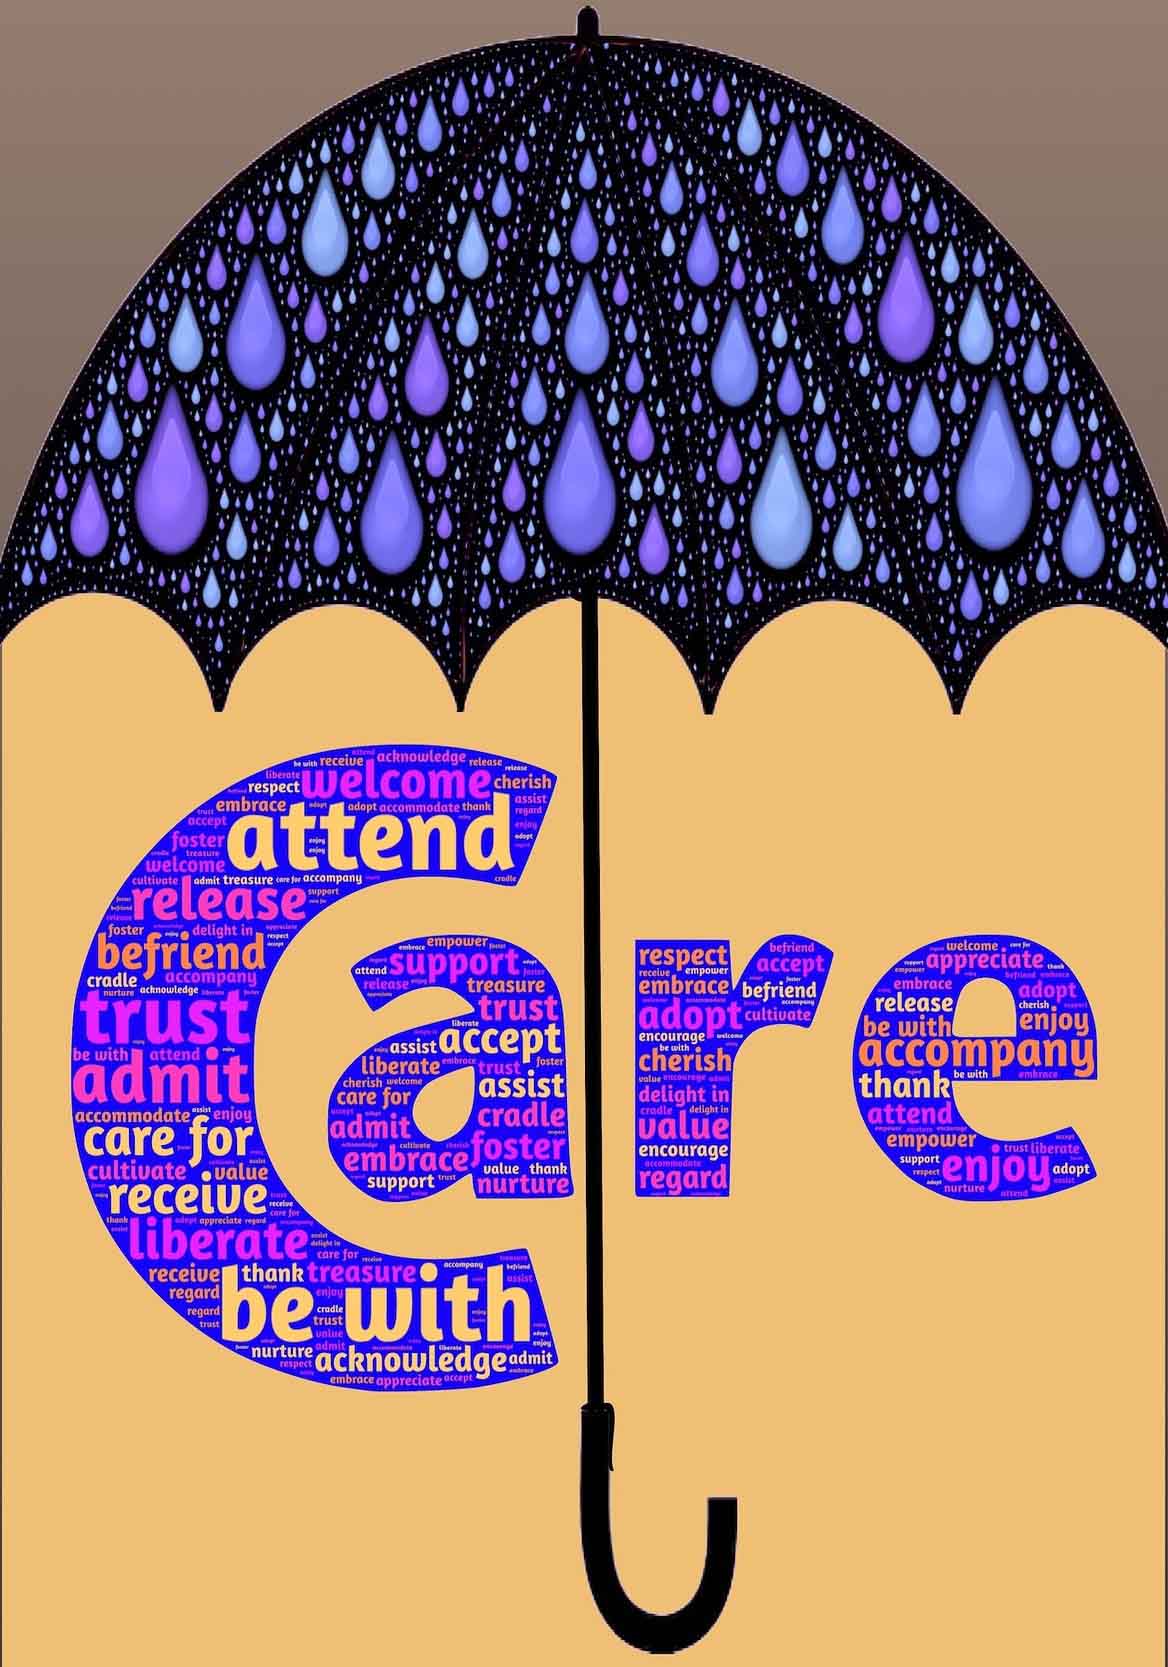 Illustration of umbrella over the word 'Care'